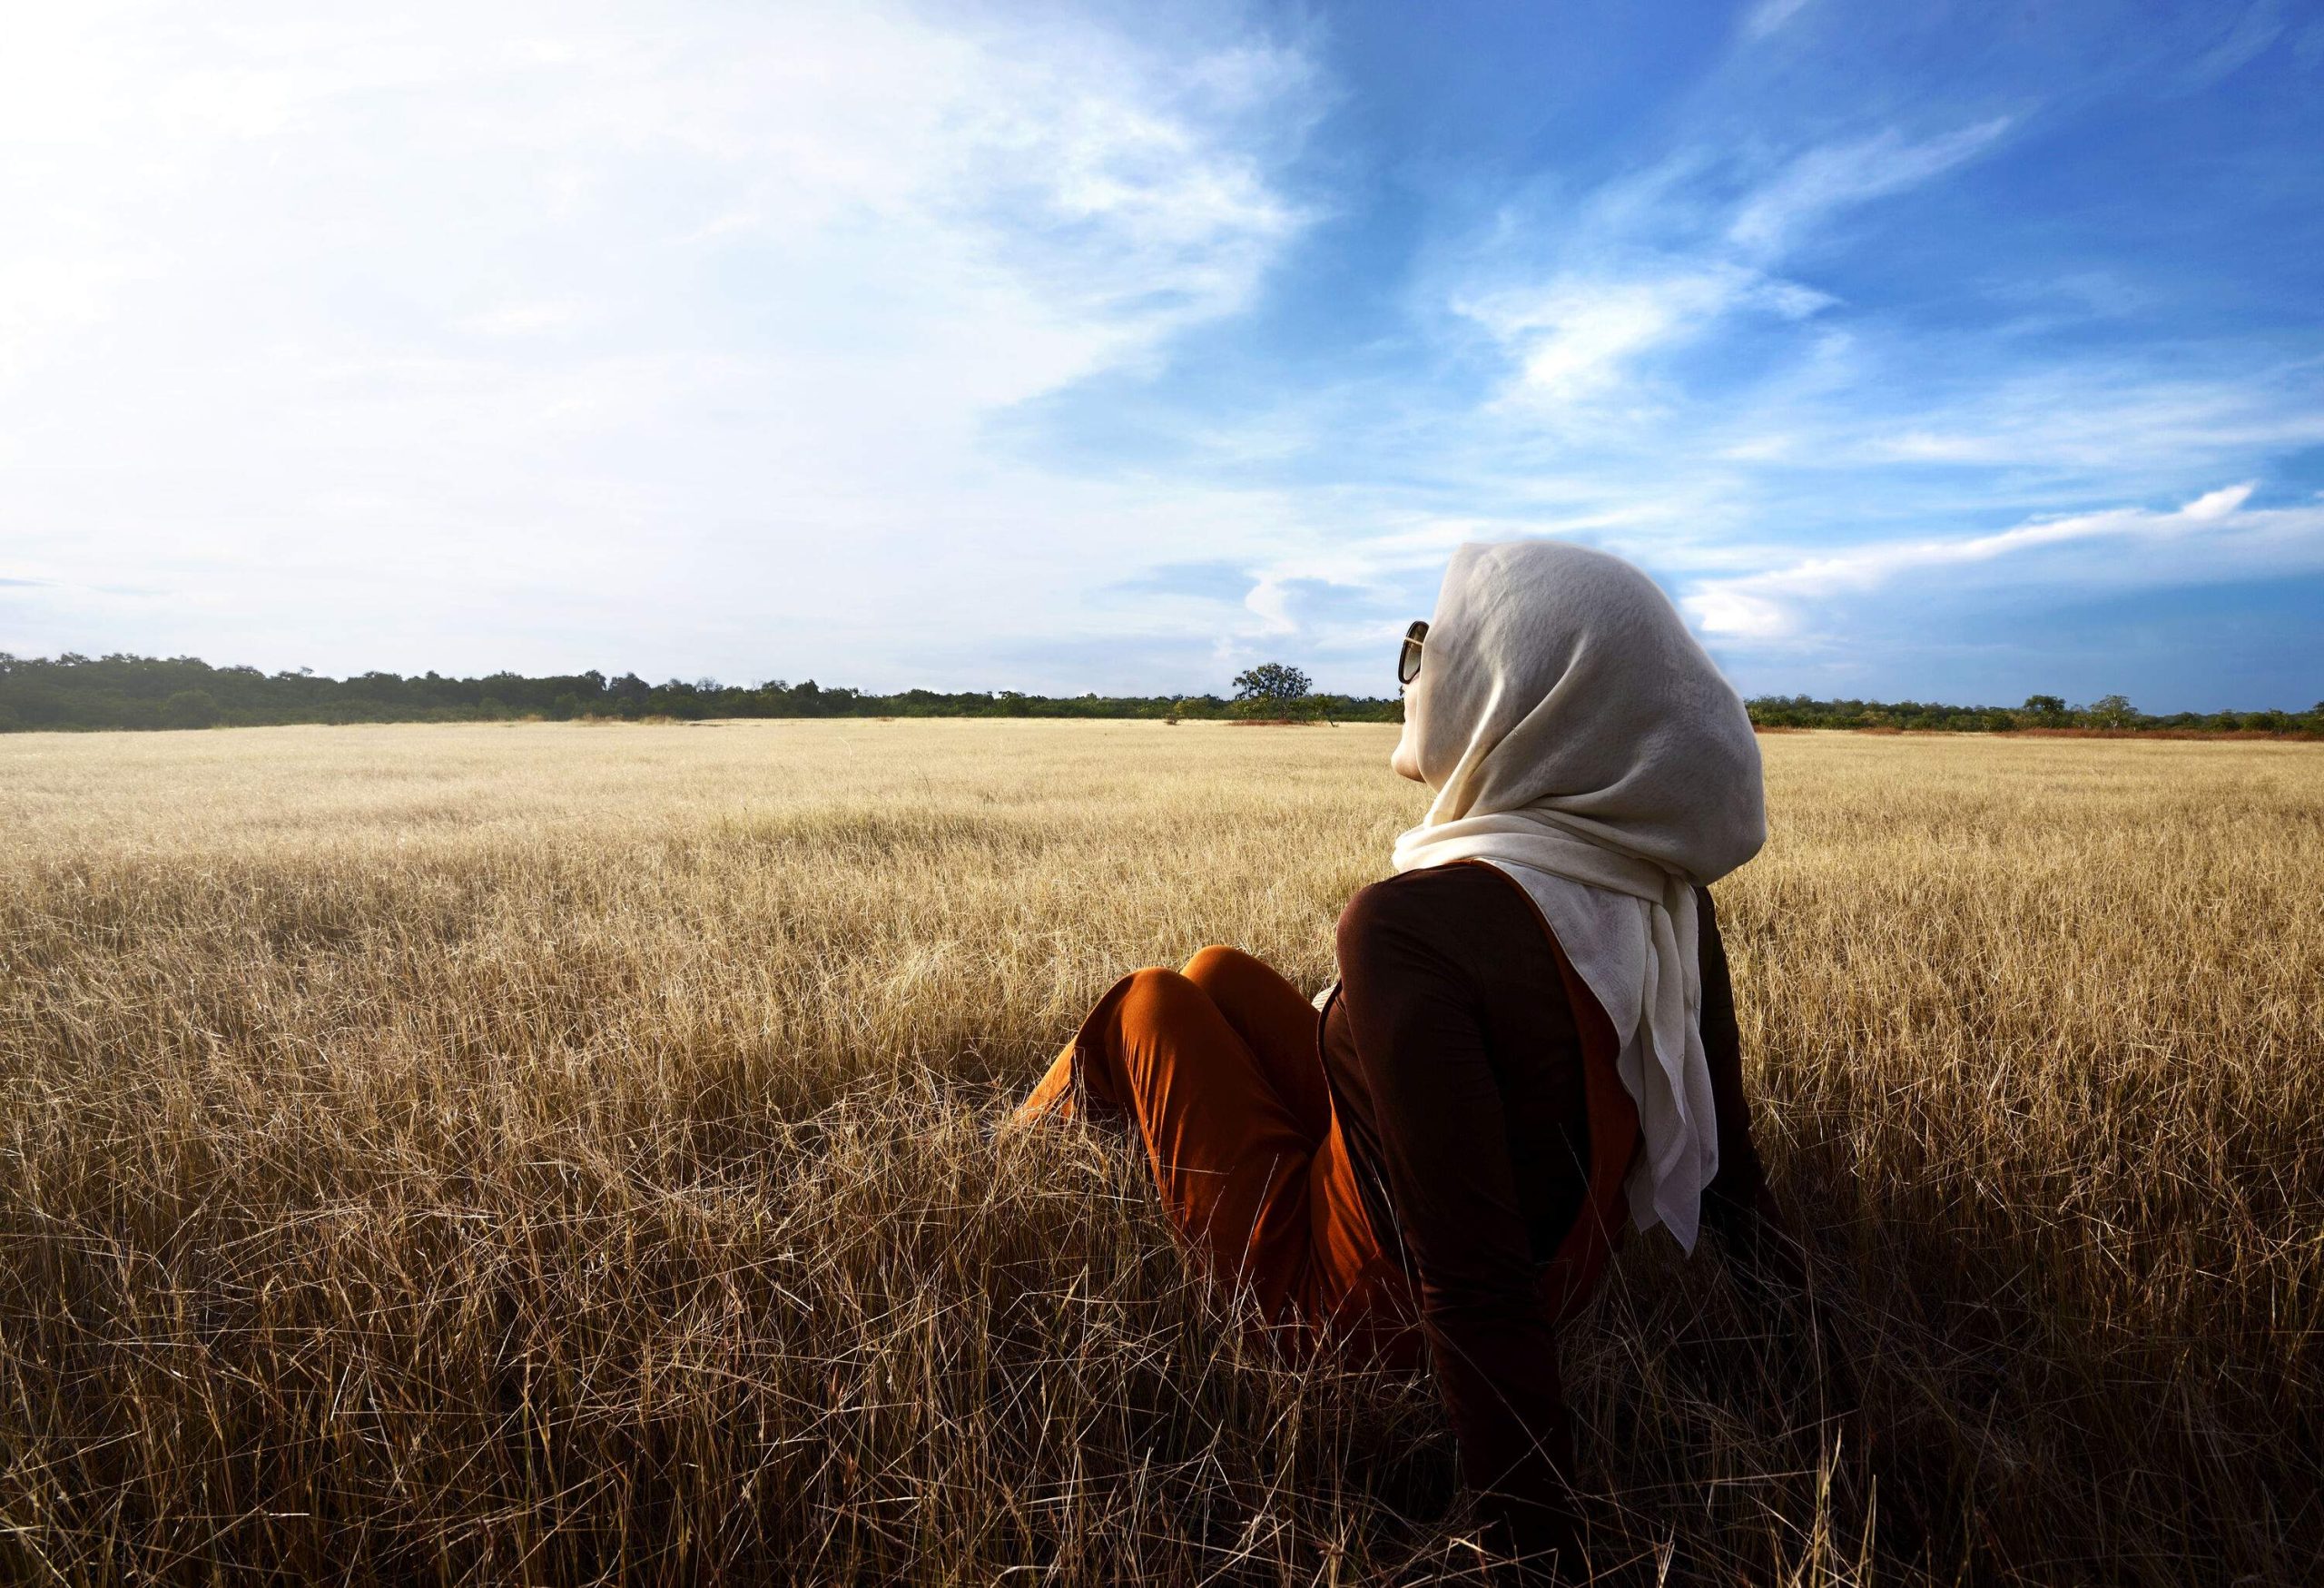 A woman wearing a hijab relaxes on the savanna, soaking up the sun with her sunglasses on as the blue sky stretches out overhead.